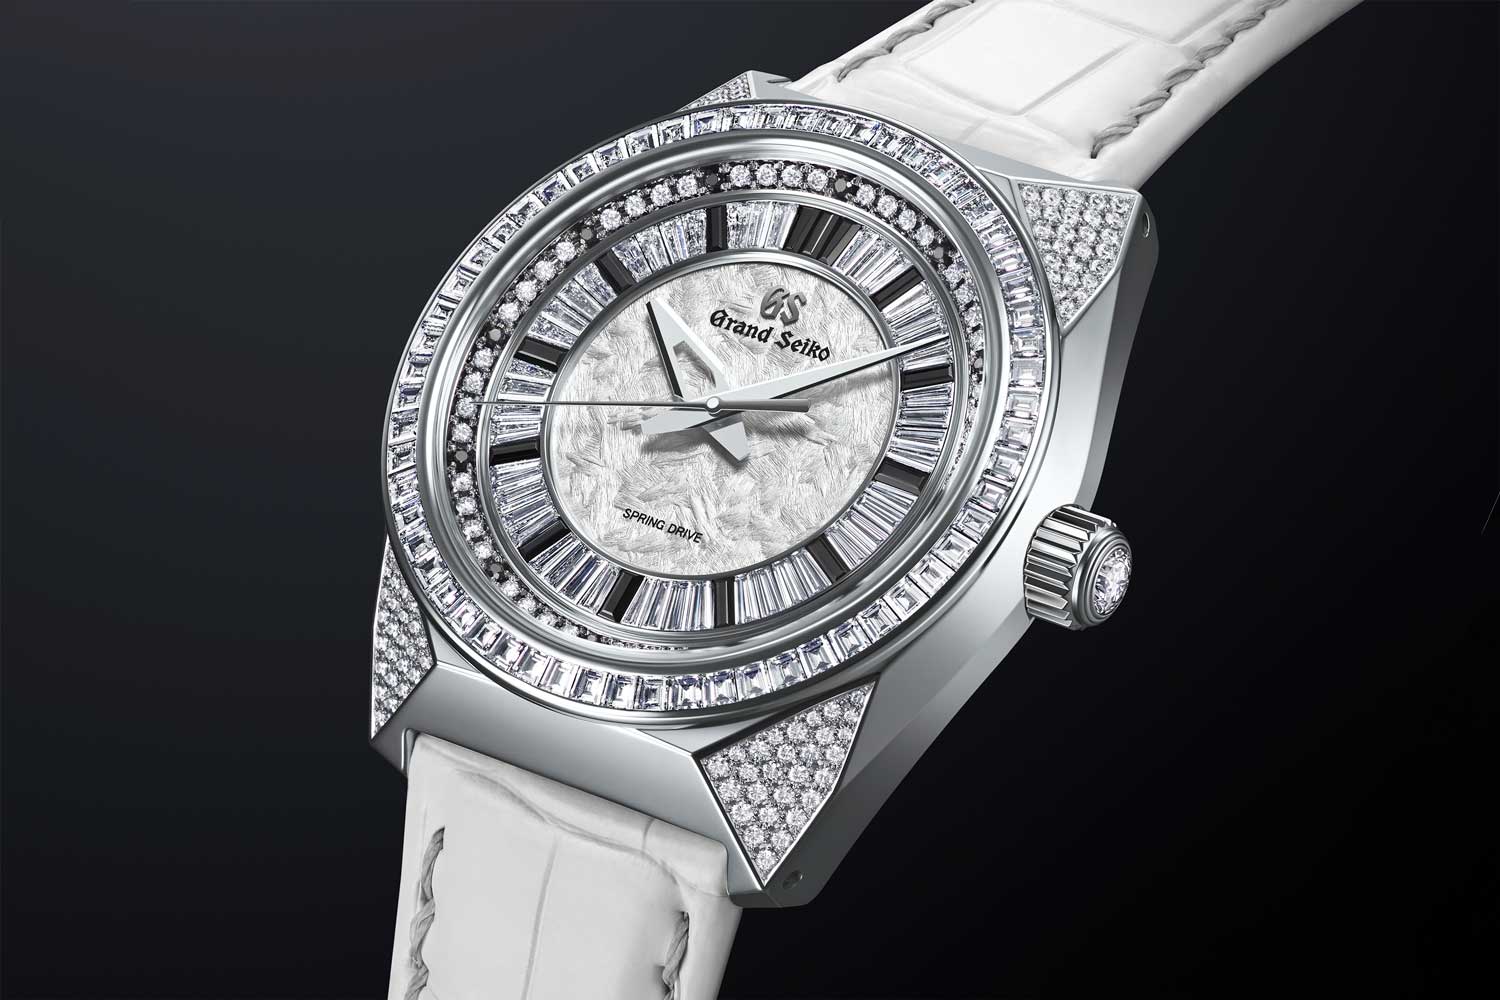 Inspired by the white lion, SBGD209 offers a dazzling display in platinum and diamond